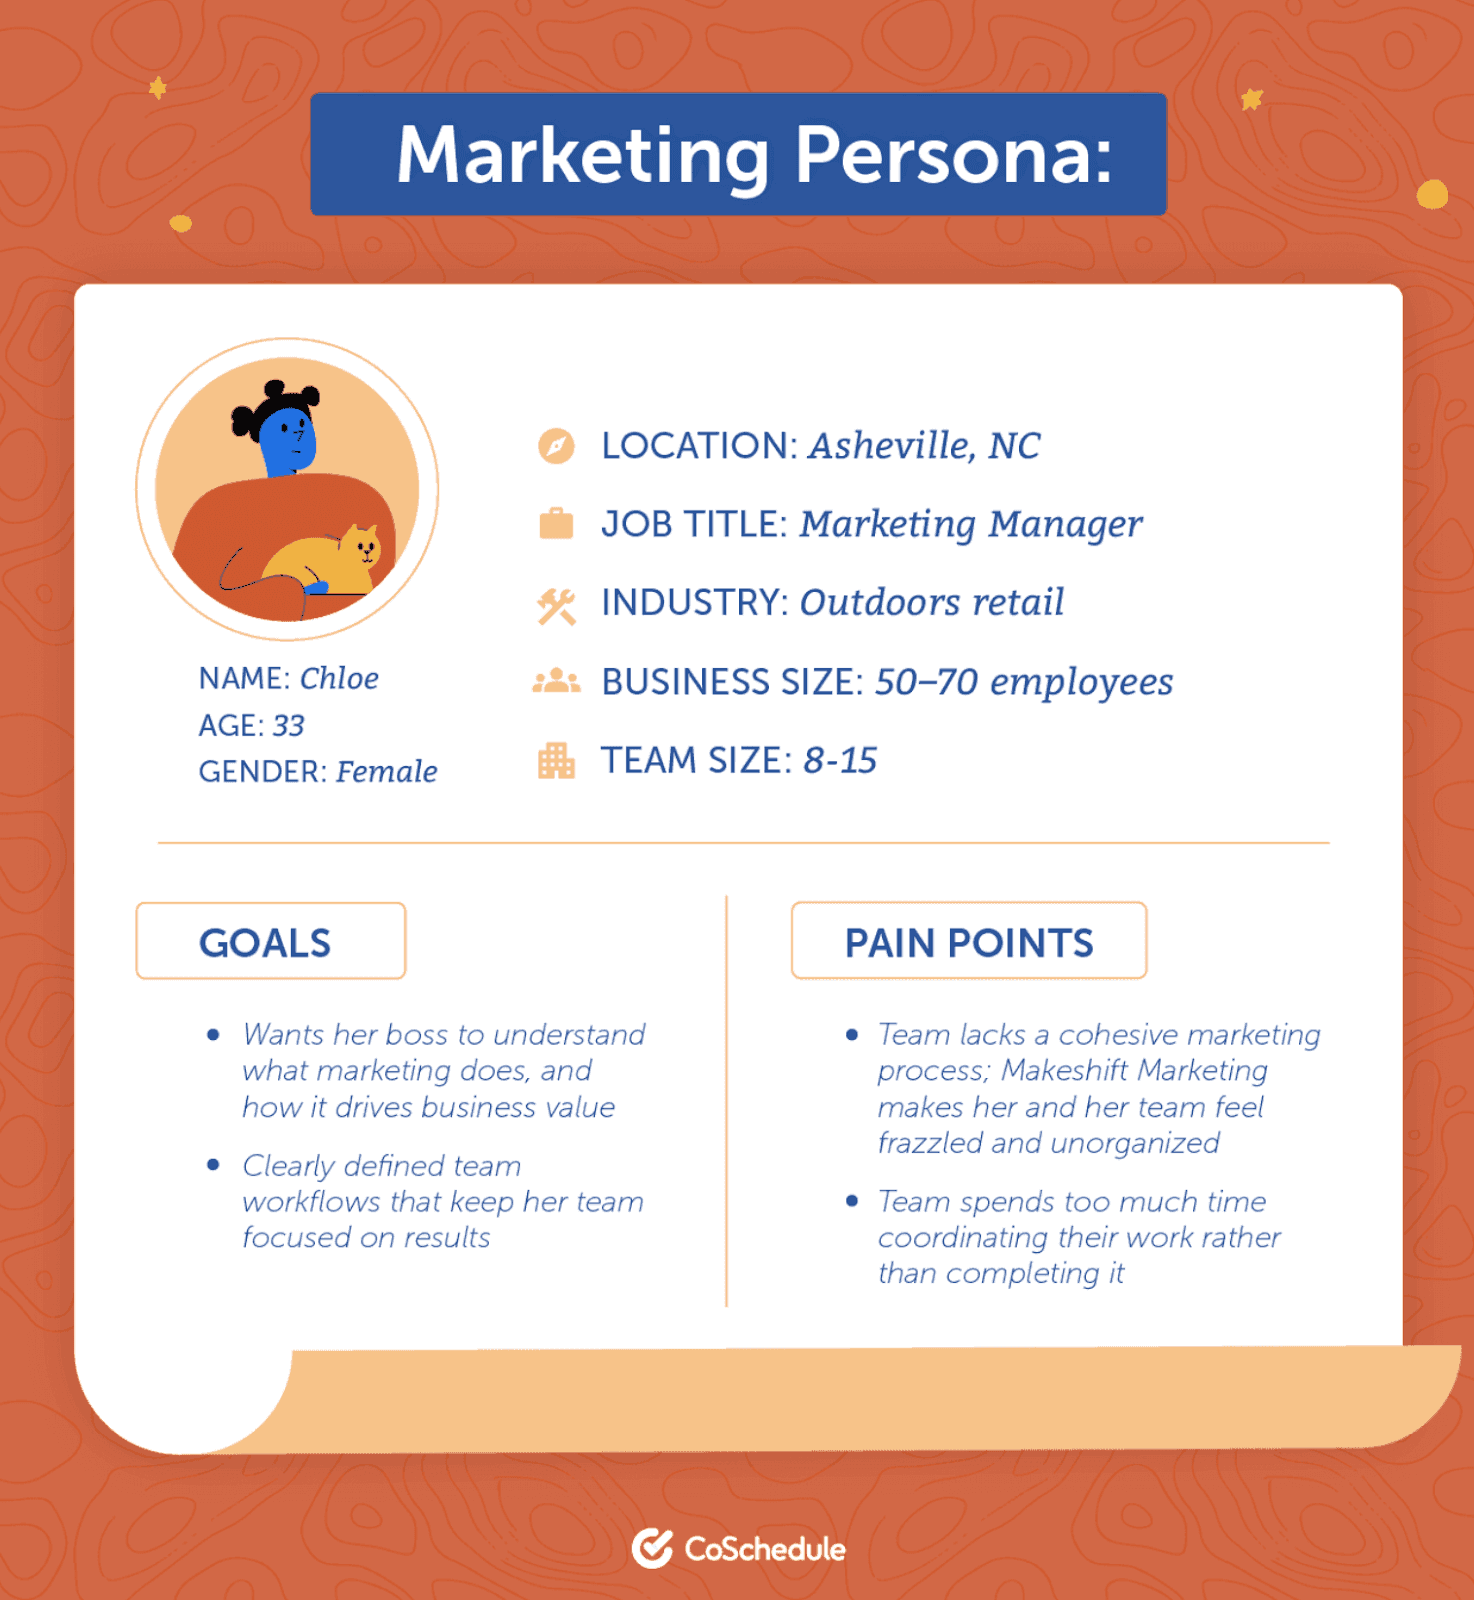 CoSchedule graphic of a marketing persona